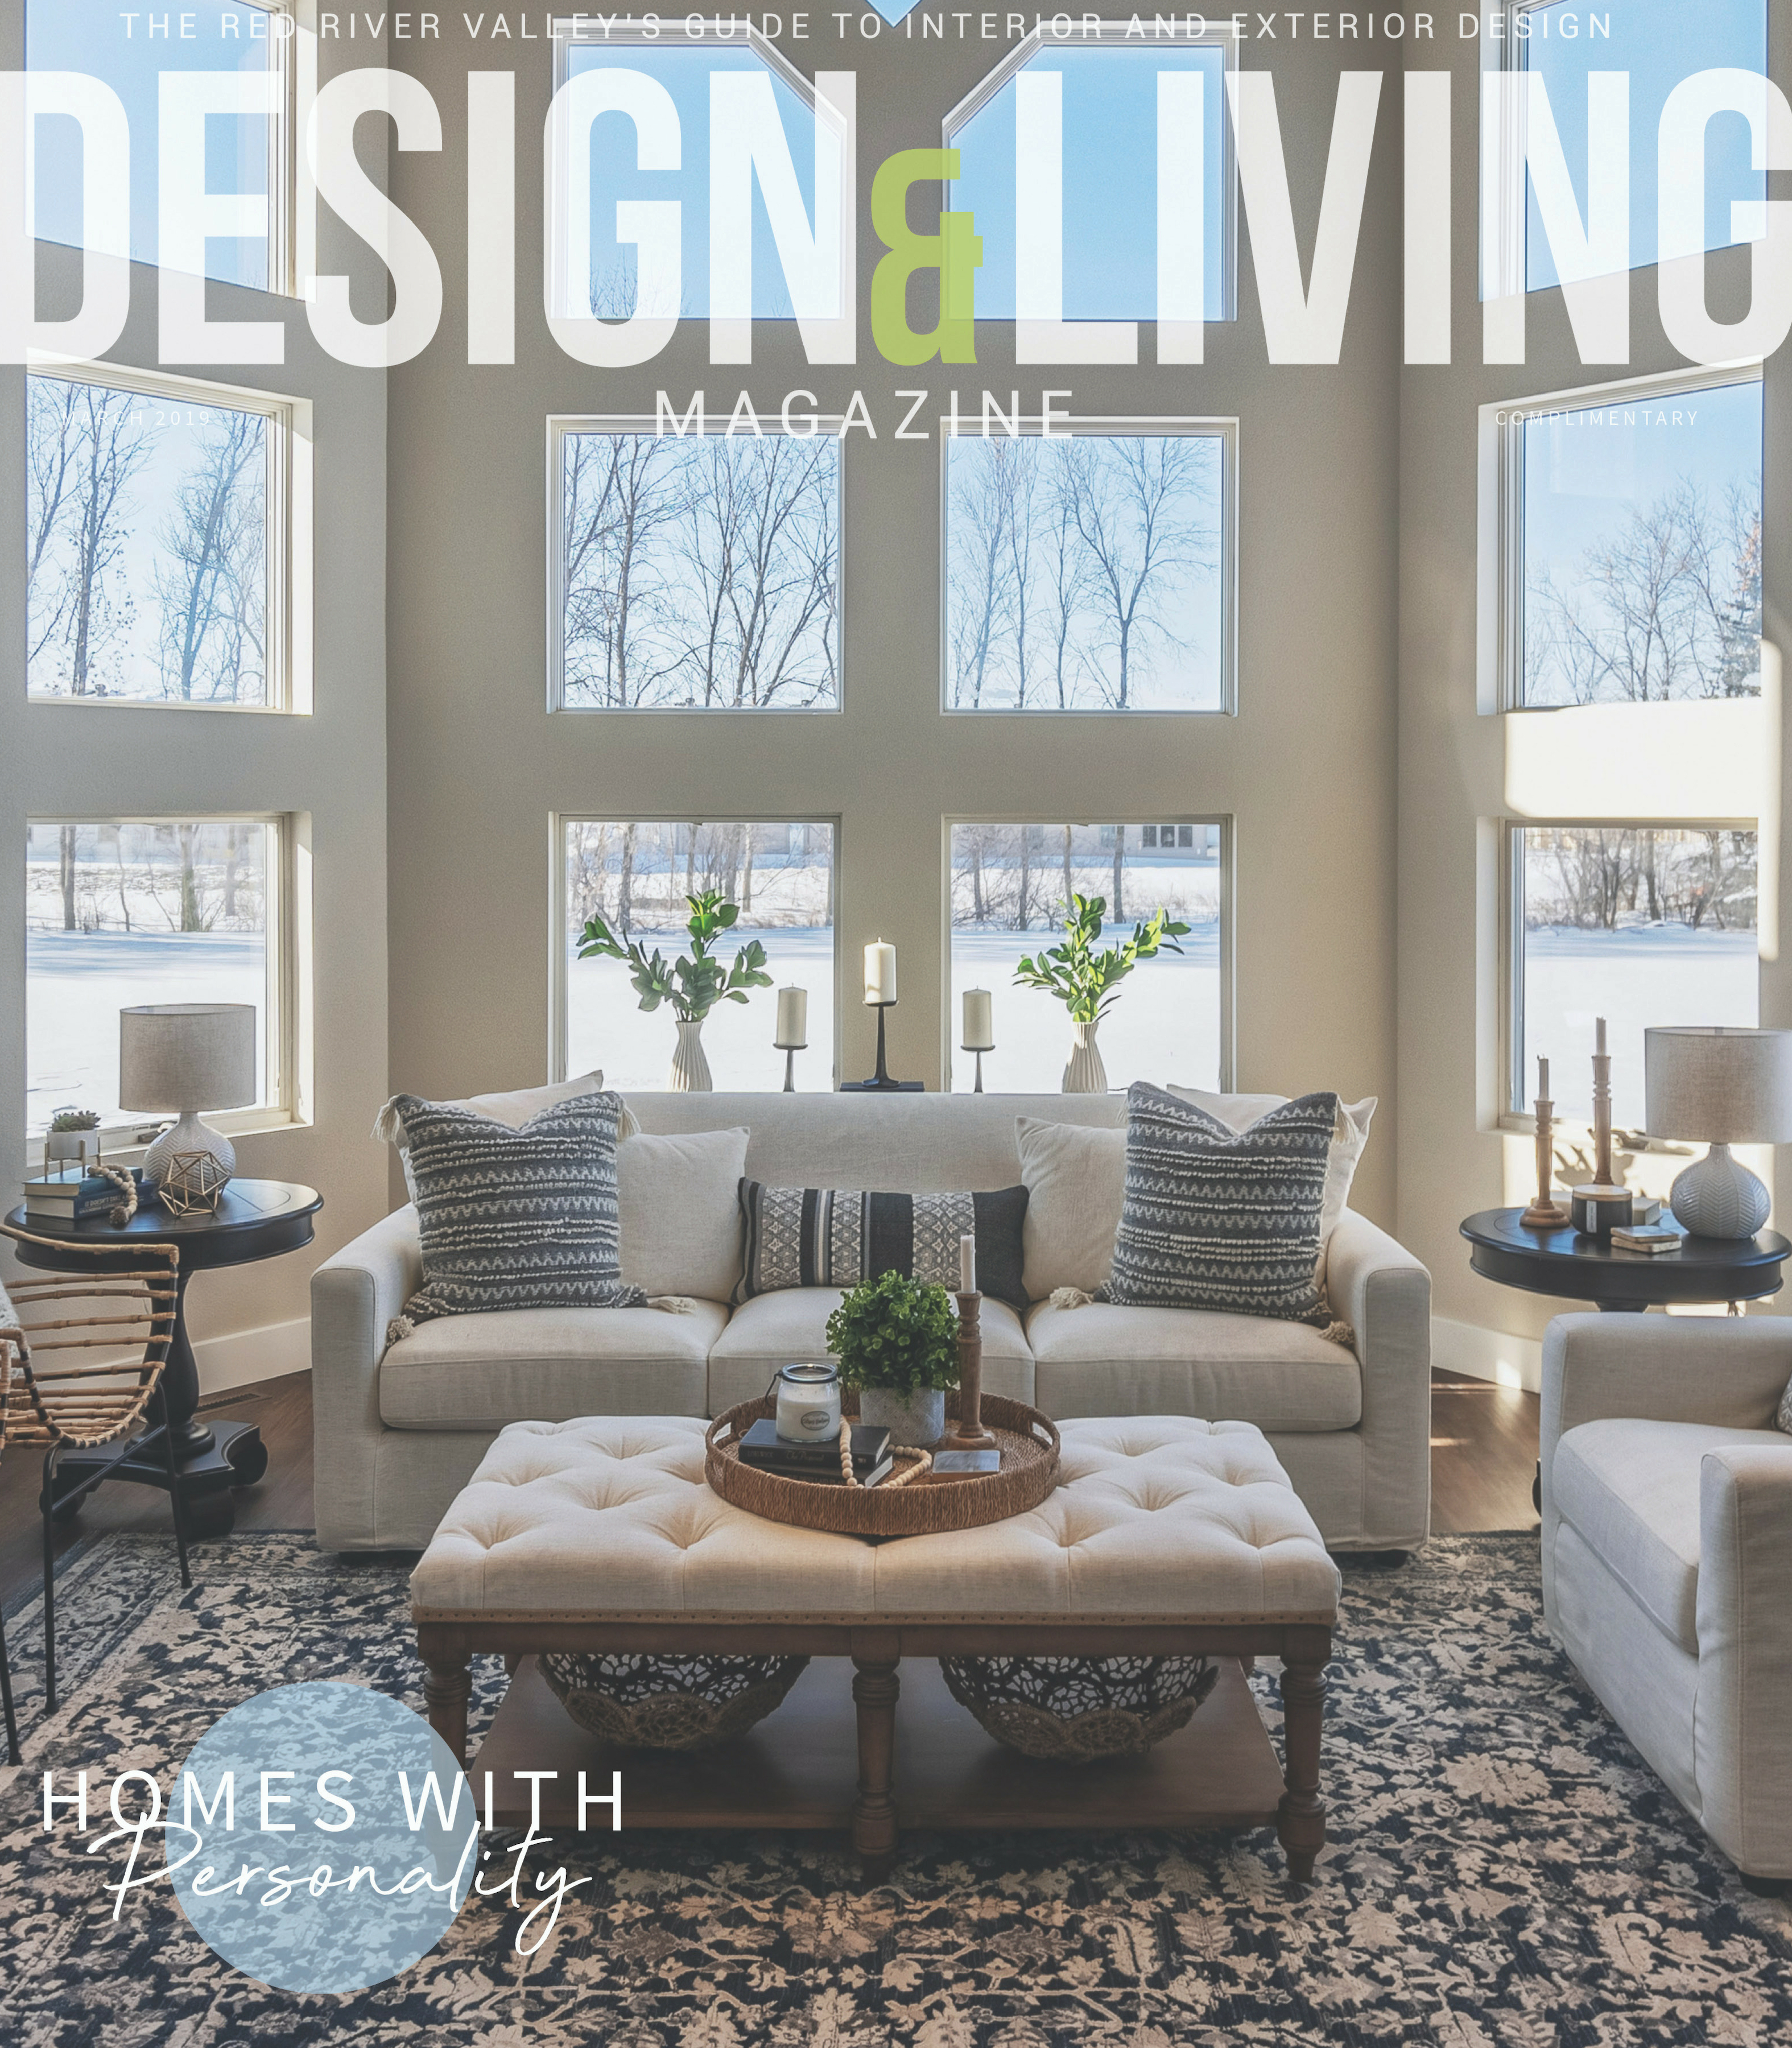 Design & Living March 2019 Cover